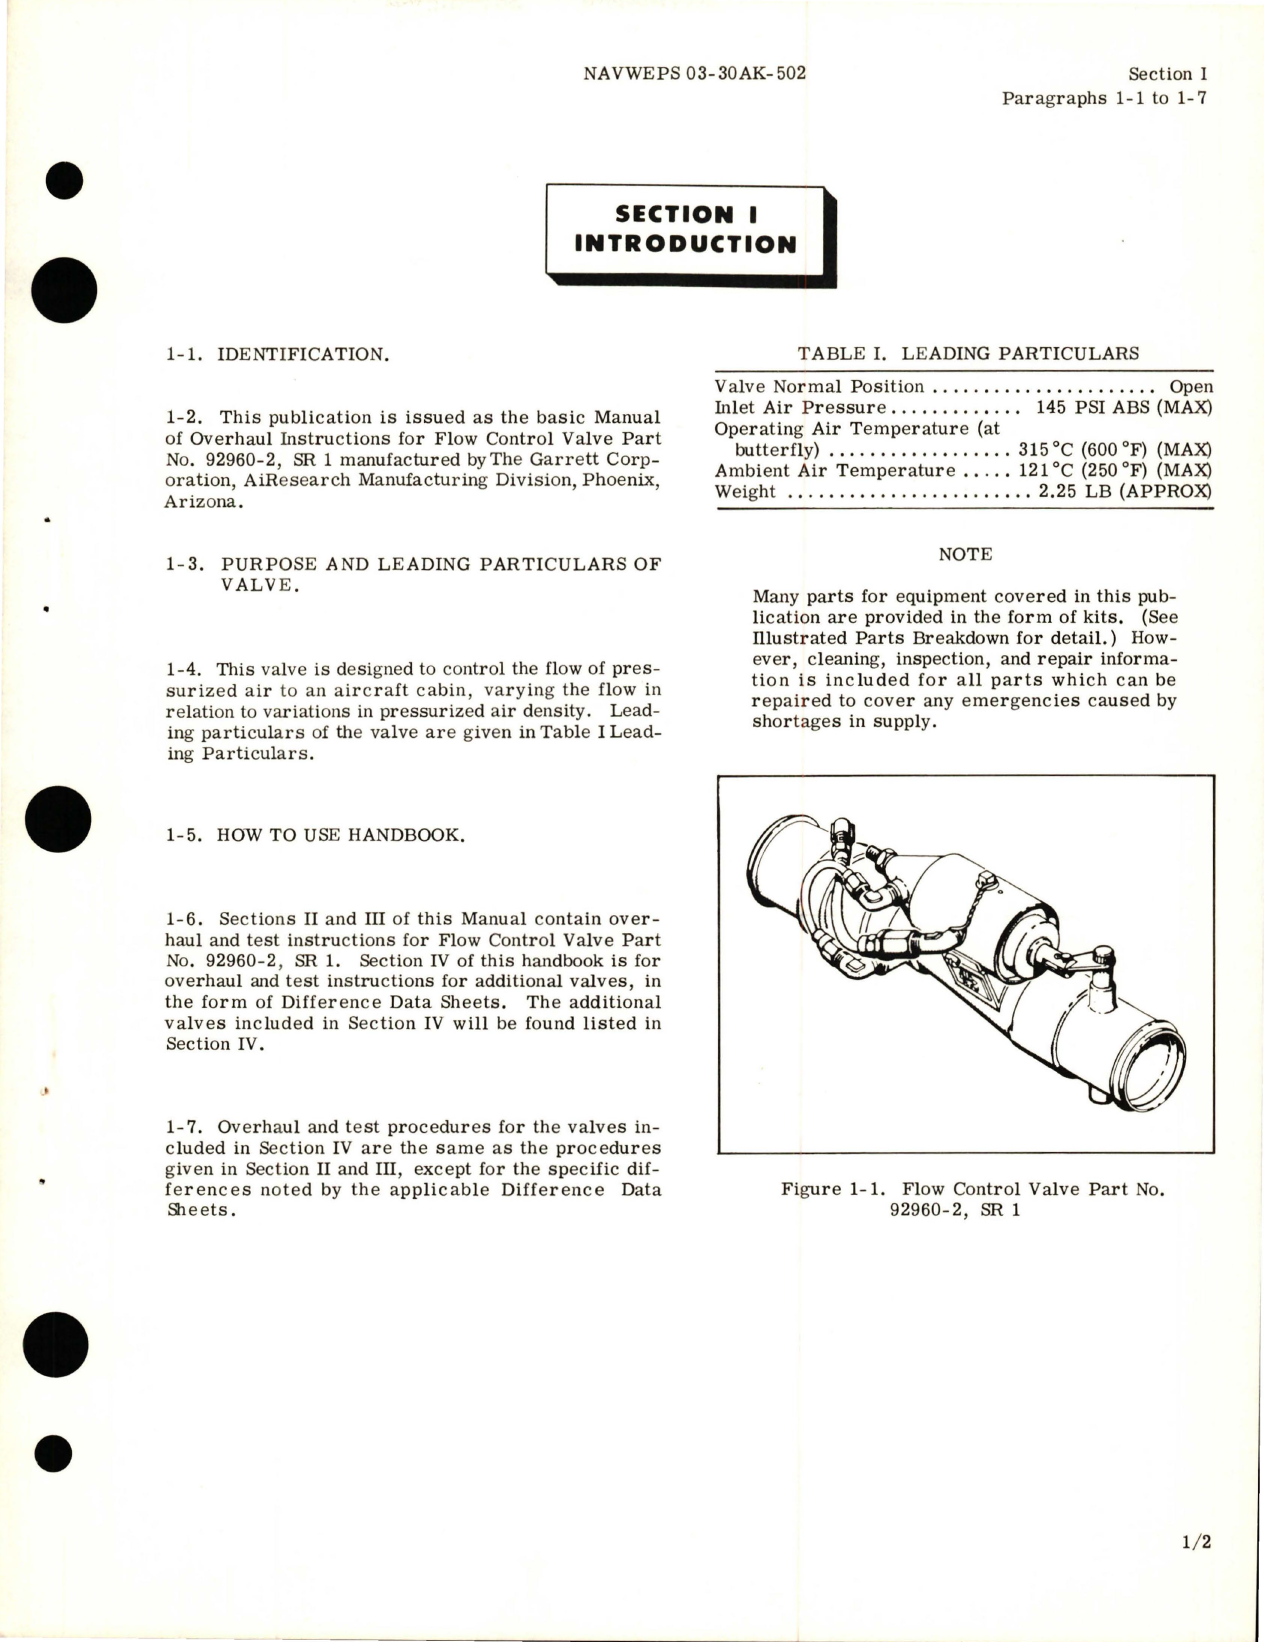 Sample page 5 from AirCorps Library document: Overhaul Instructions for Flow Control Valve - Part 92960-2 SR 1